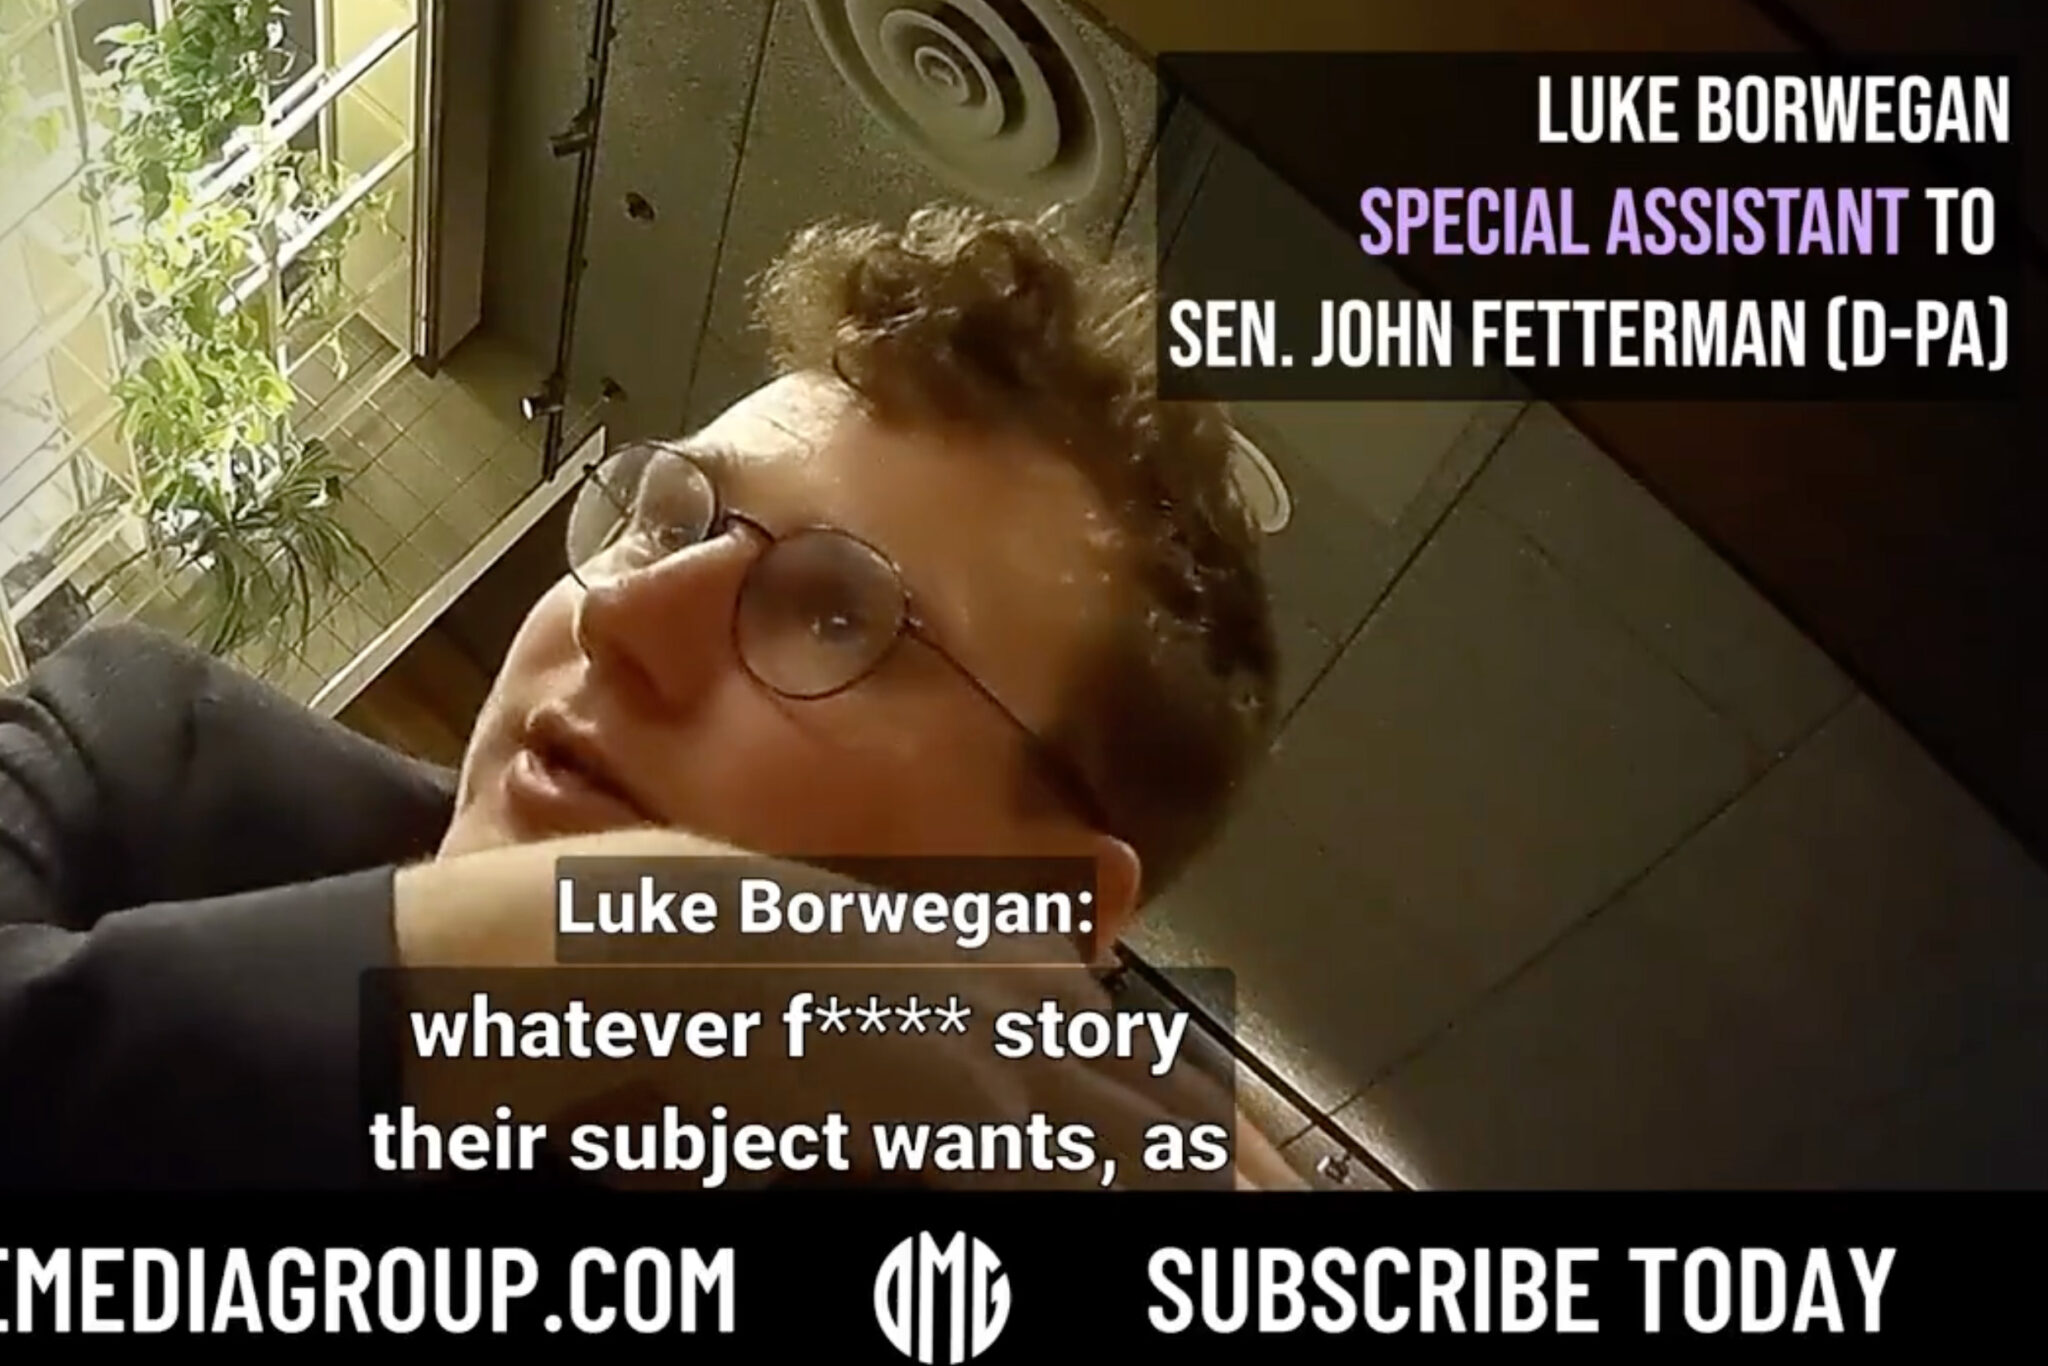 In a recent undercover O’Keefe Media Group video, Luke Borwegan, a special assistant to John Fetterman, reveals information about how they select journalists to cover Fetterman and what the Senator’s stance on the Second Amendment is. 